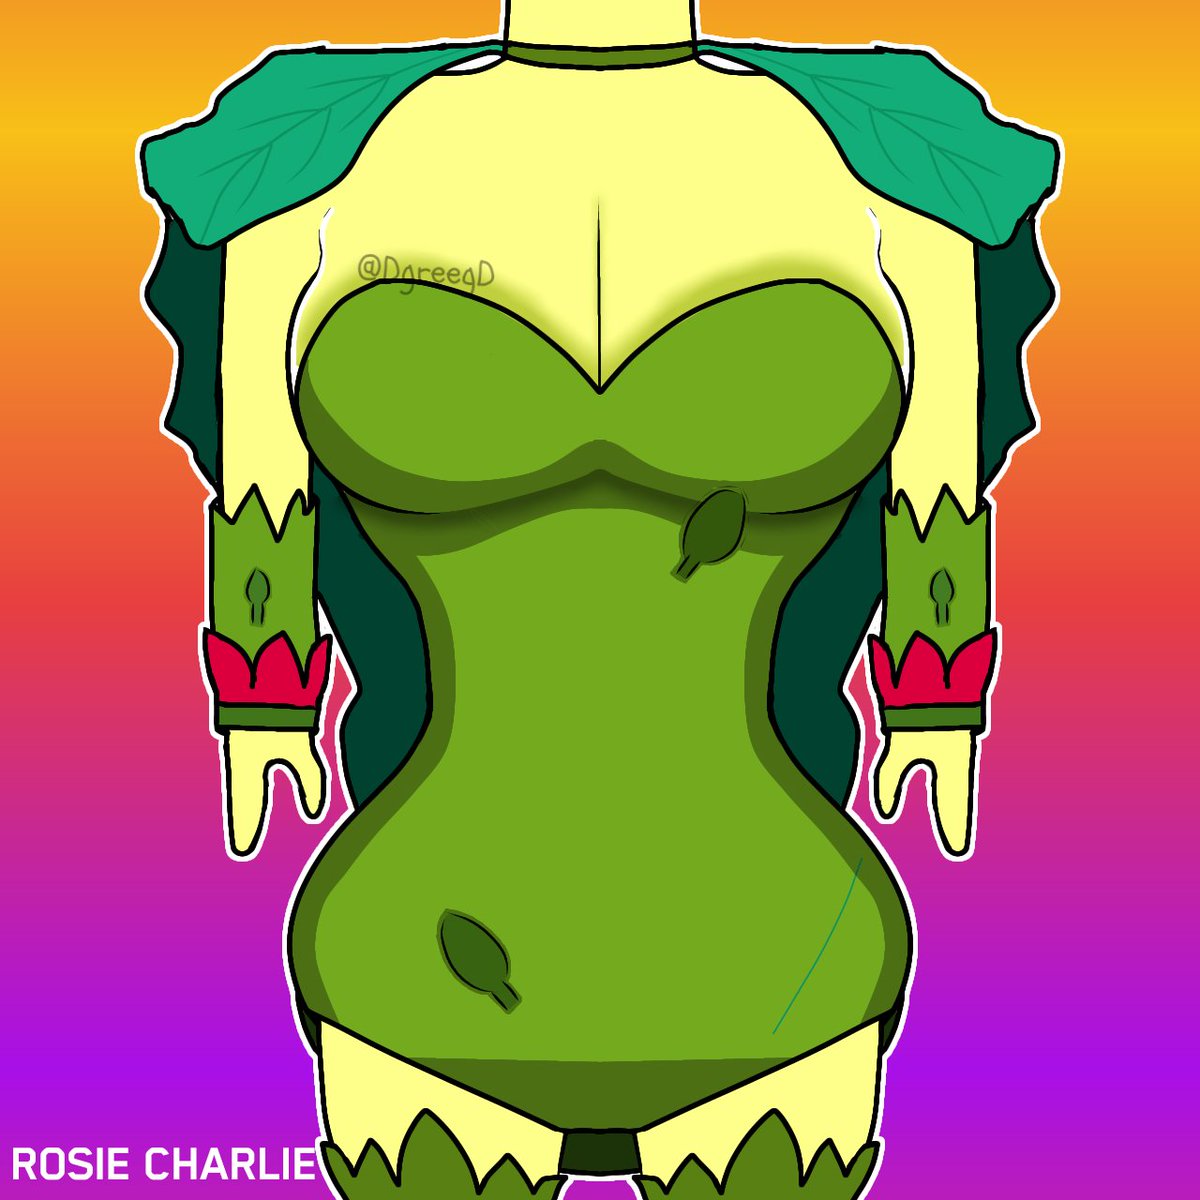 Rosie Charlie (I swear this is the last Charlie art)
#BrawlStars #BrawlStarsArt #BrawlStarsCharlie #BrawlPass